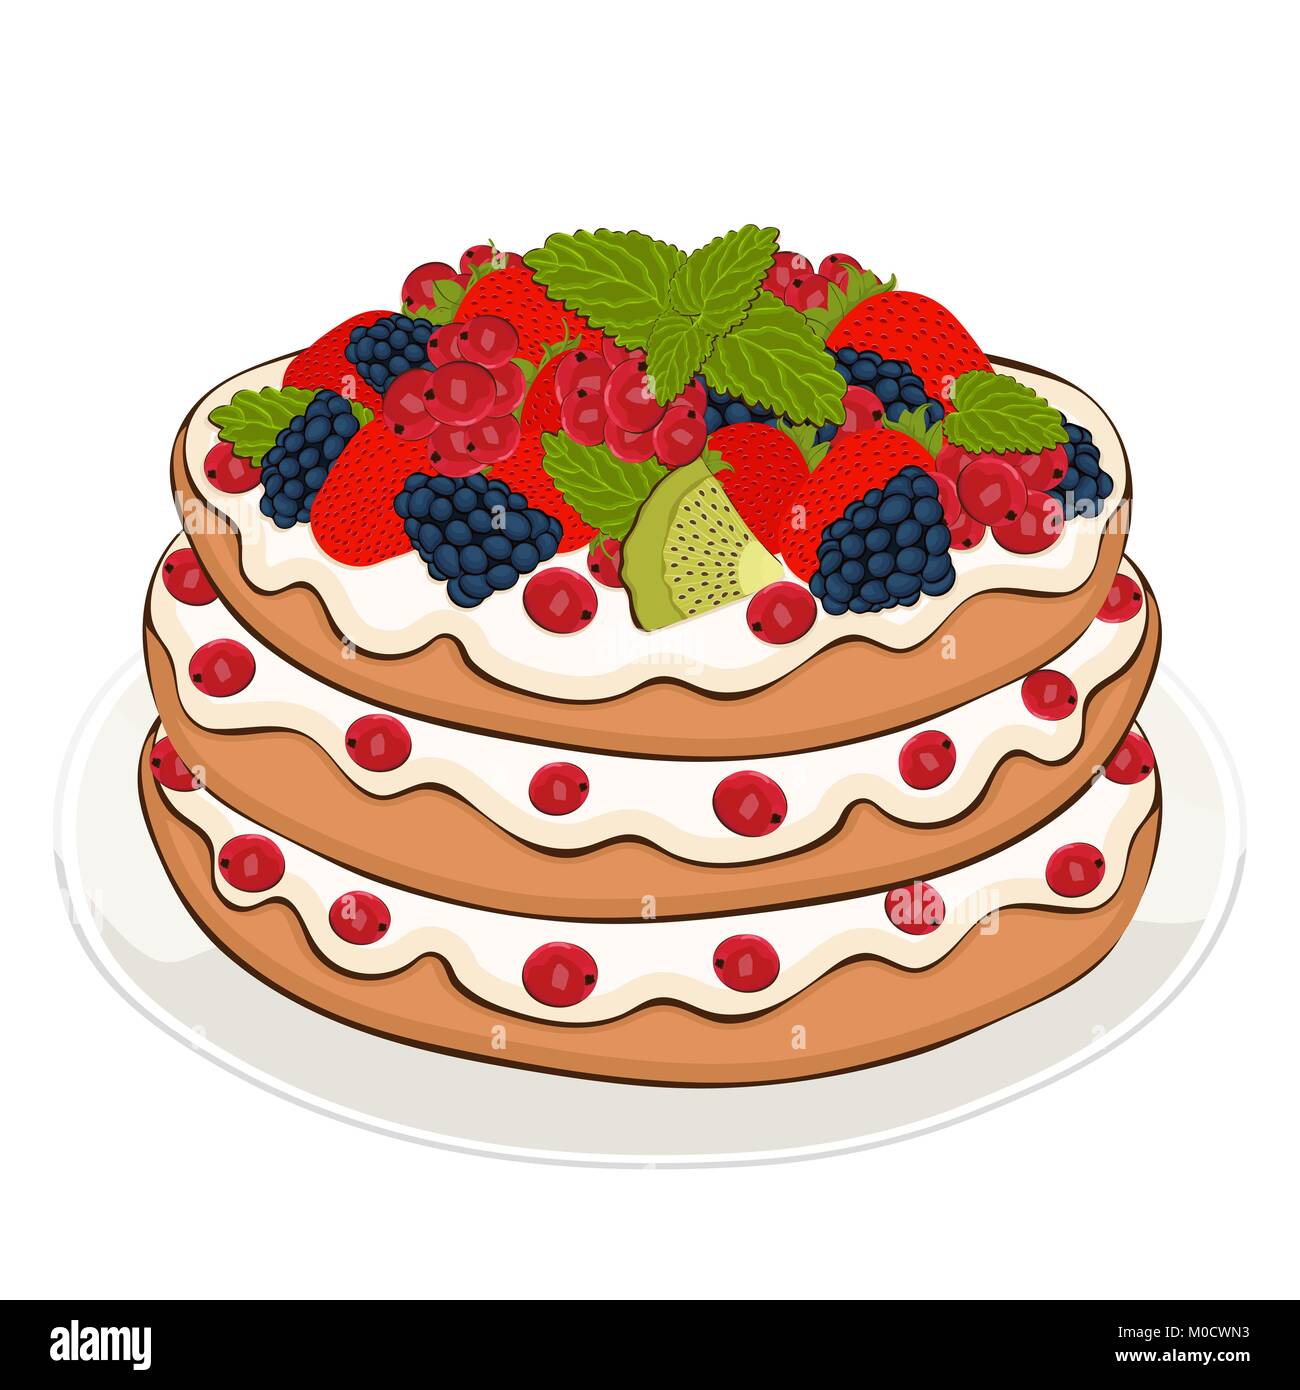 Pie with cream and berries, vector drawing, painted dessert. Layer cake with strawberry, blackberry, currant and kiwi fruit on the plate isolated on w Stock Vector